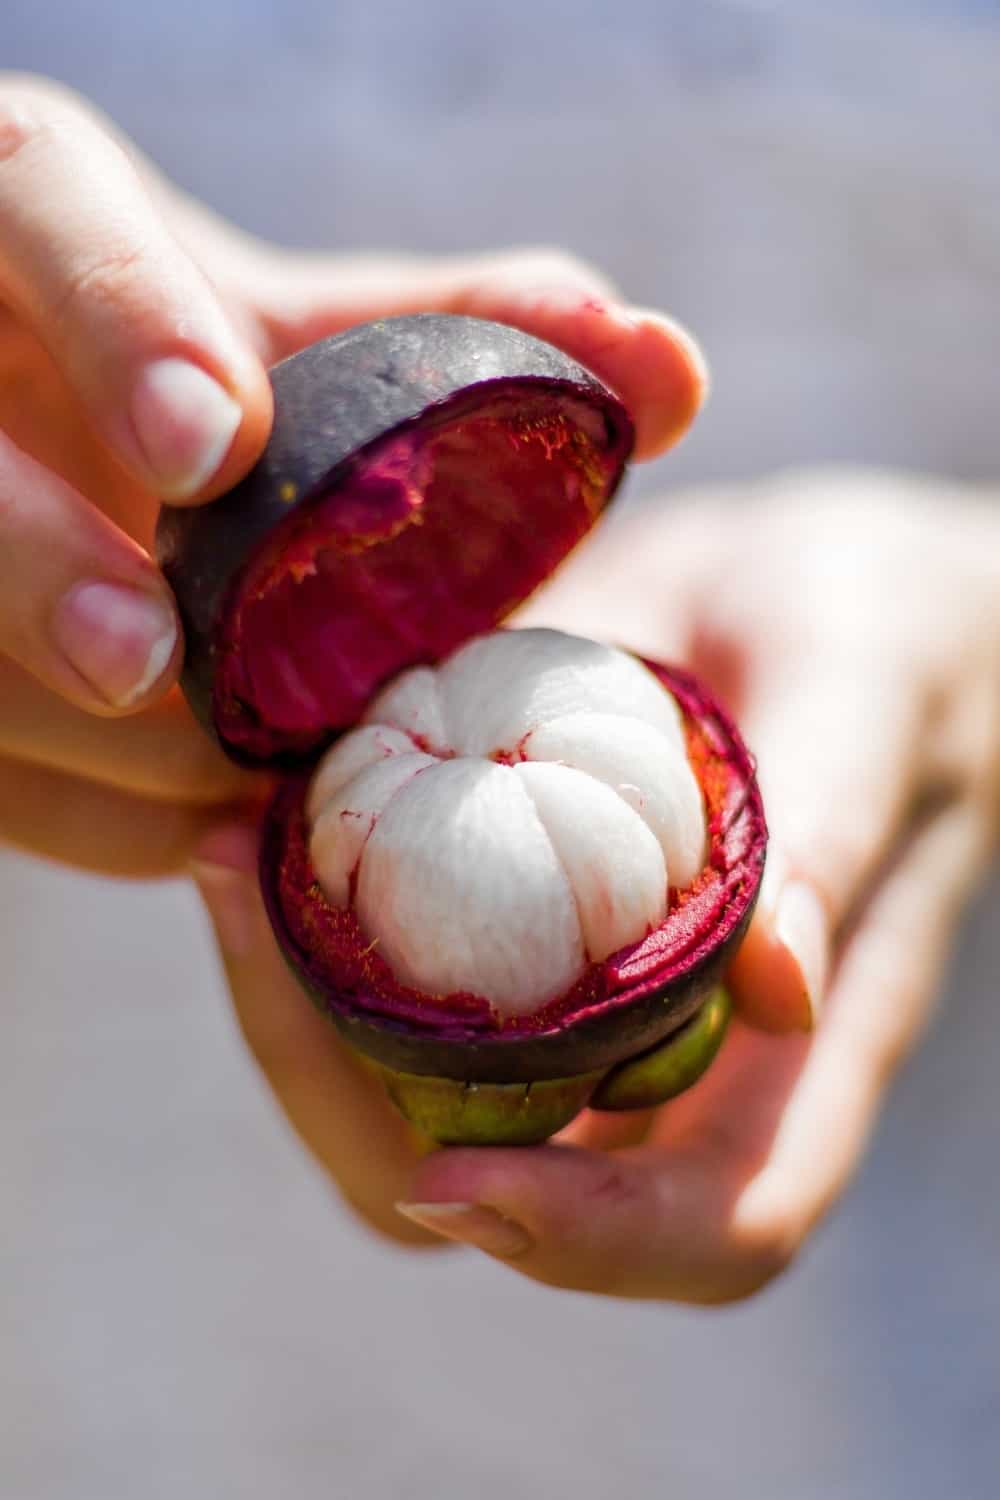 Fresh mangosteen in my hand ready to eat